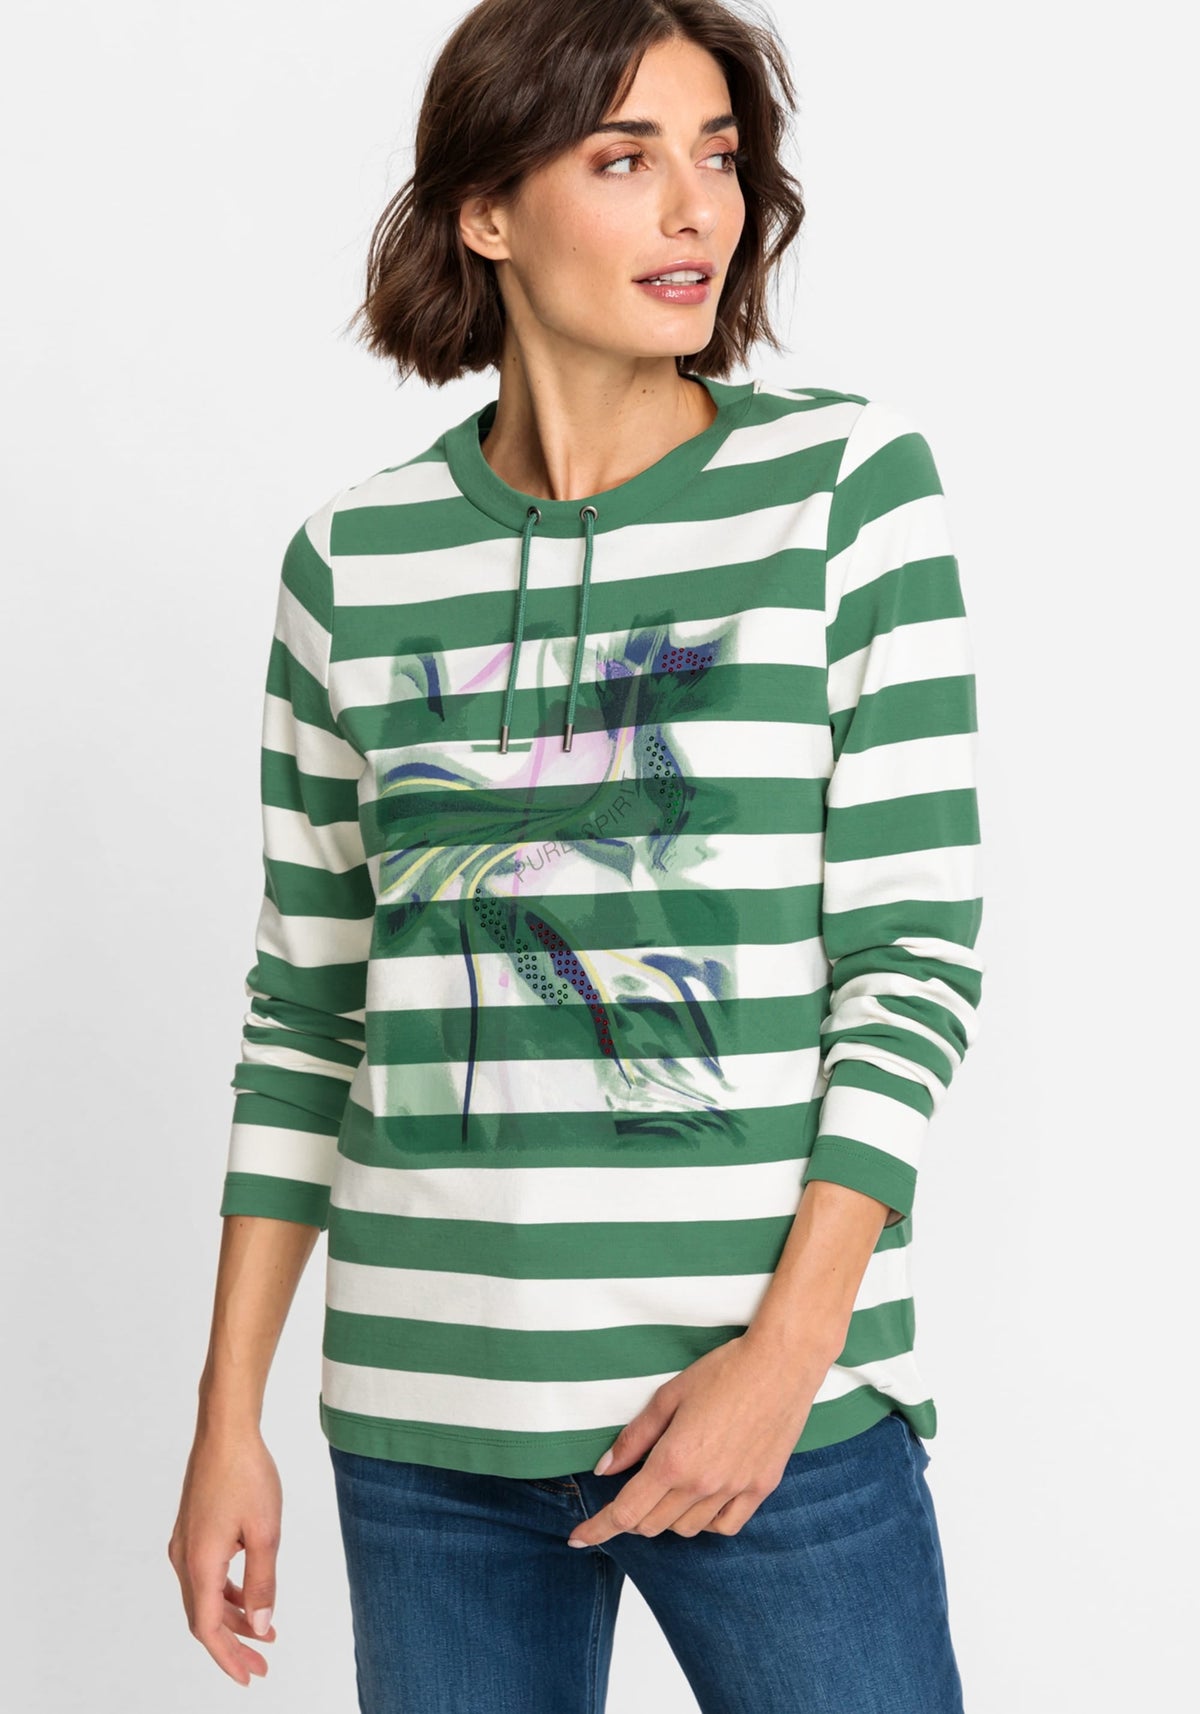 100% Cotton Long Sleeve Stripe and Placement Print Jersey Top